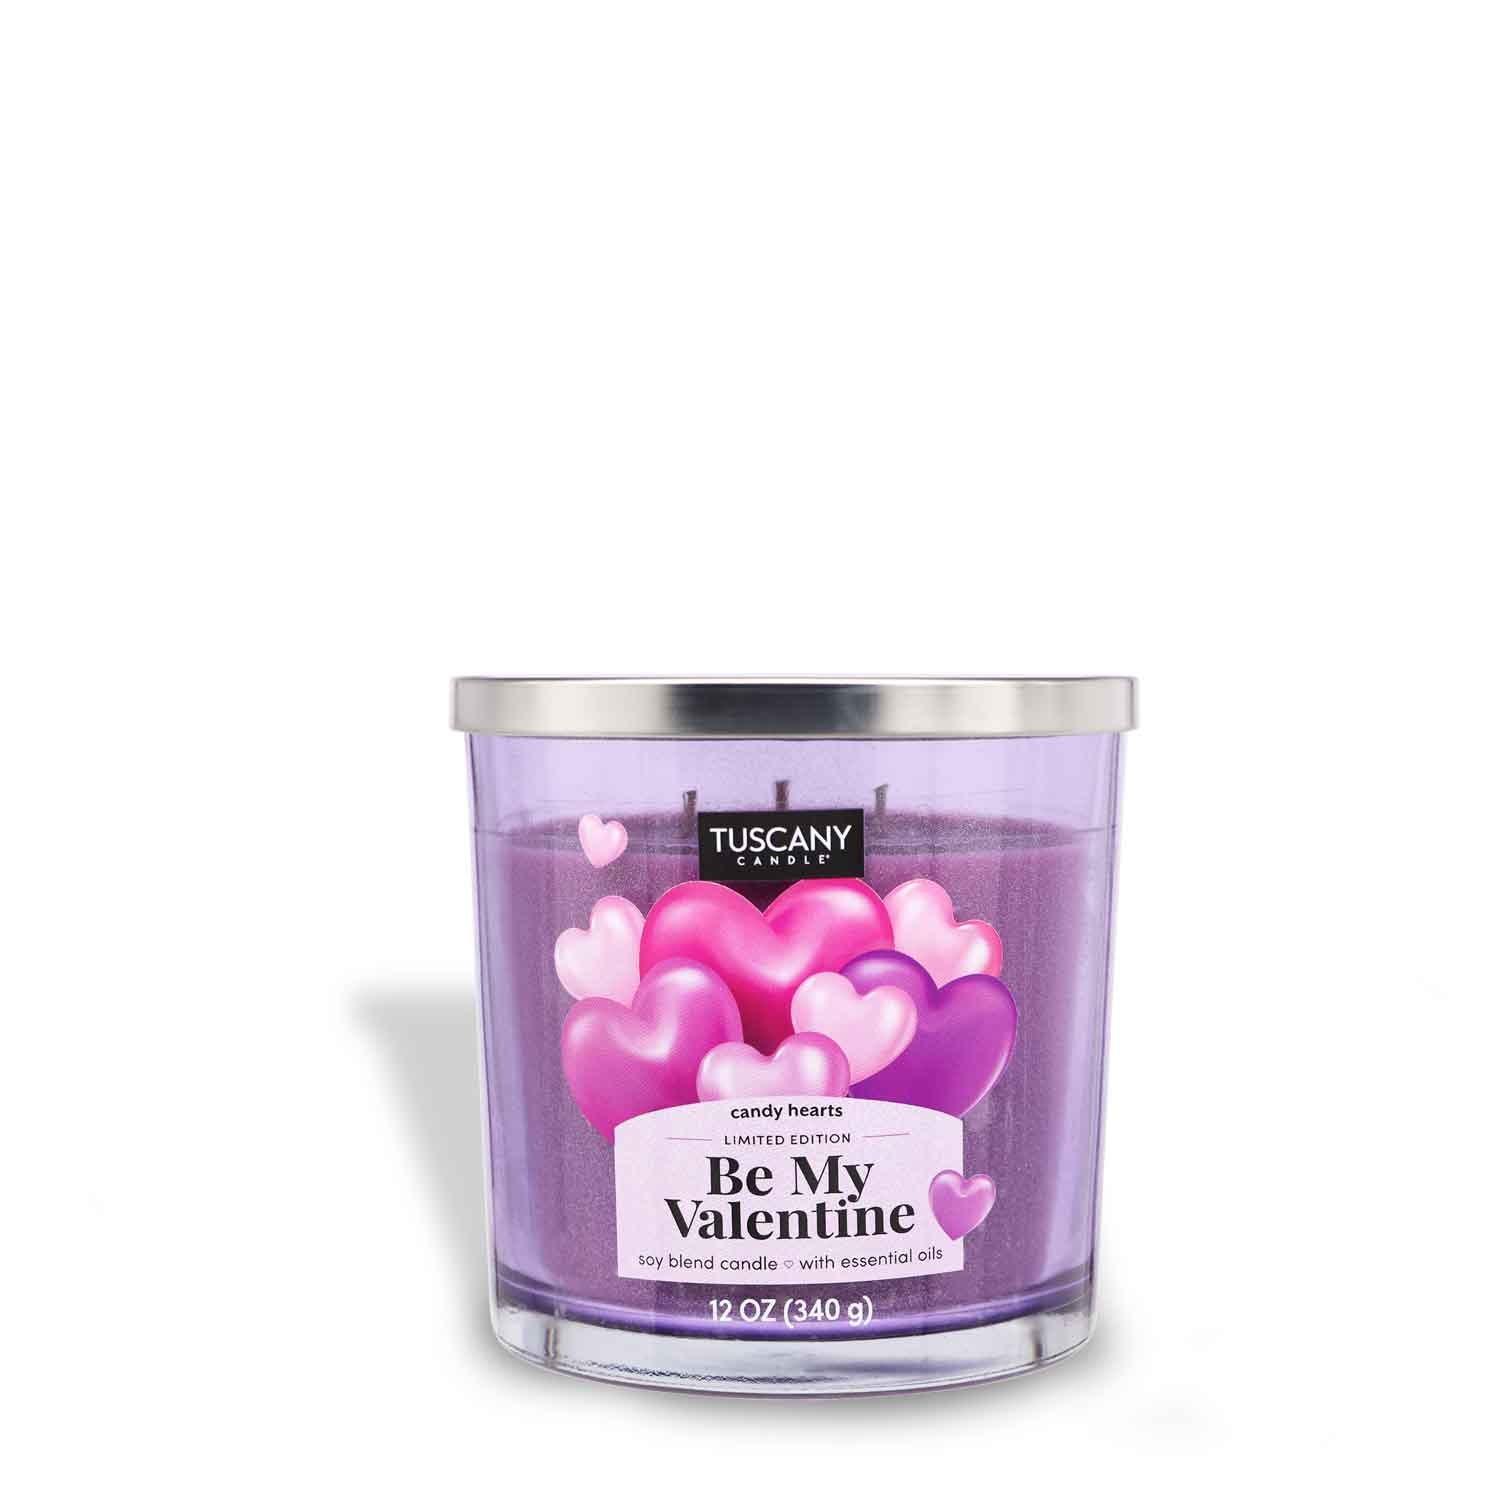 Indulge in the sugary delight of my Be My Valentine Scented Jar Candle (12 oz) from the Tuscany Candle®.